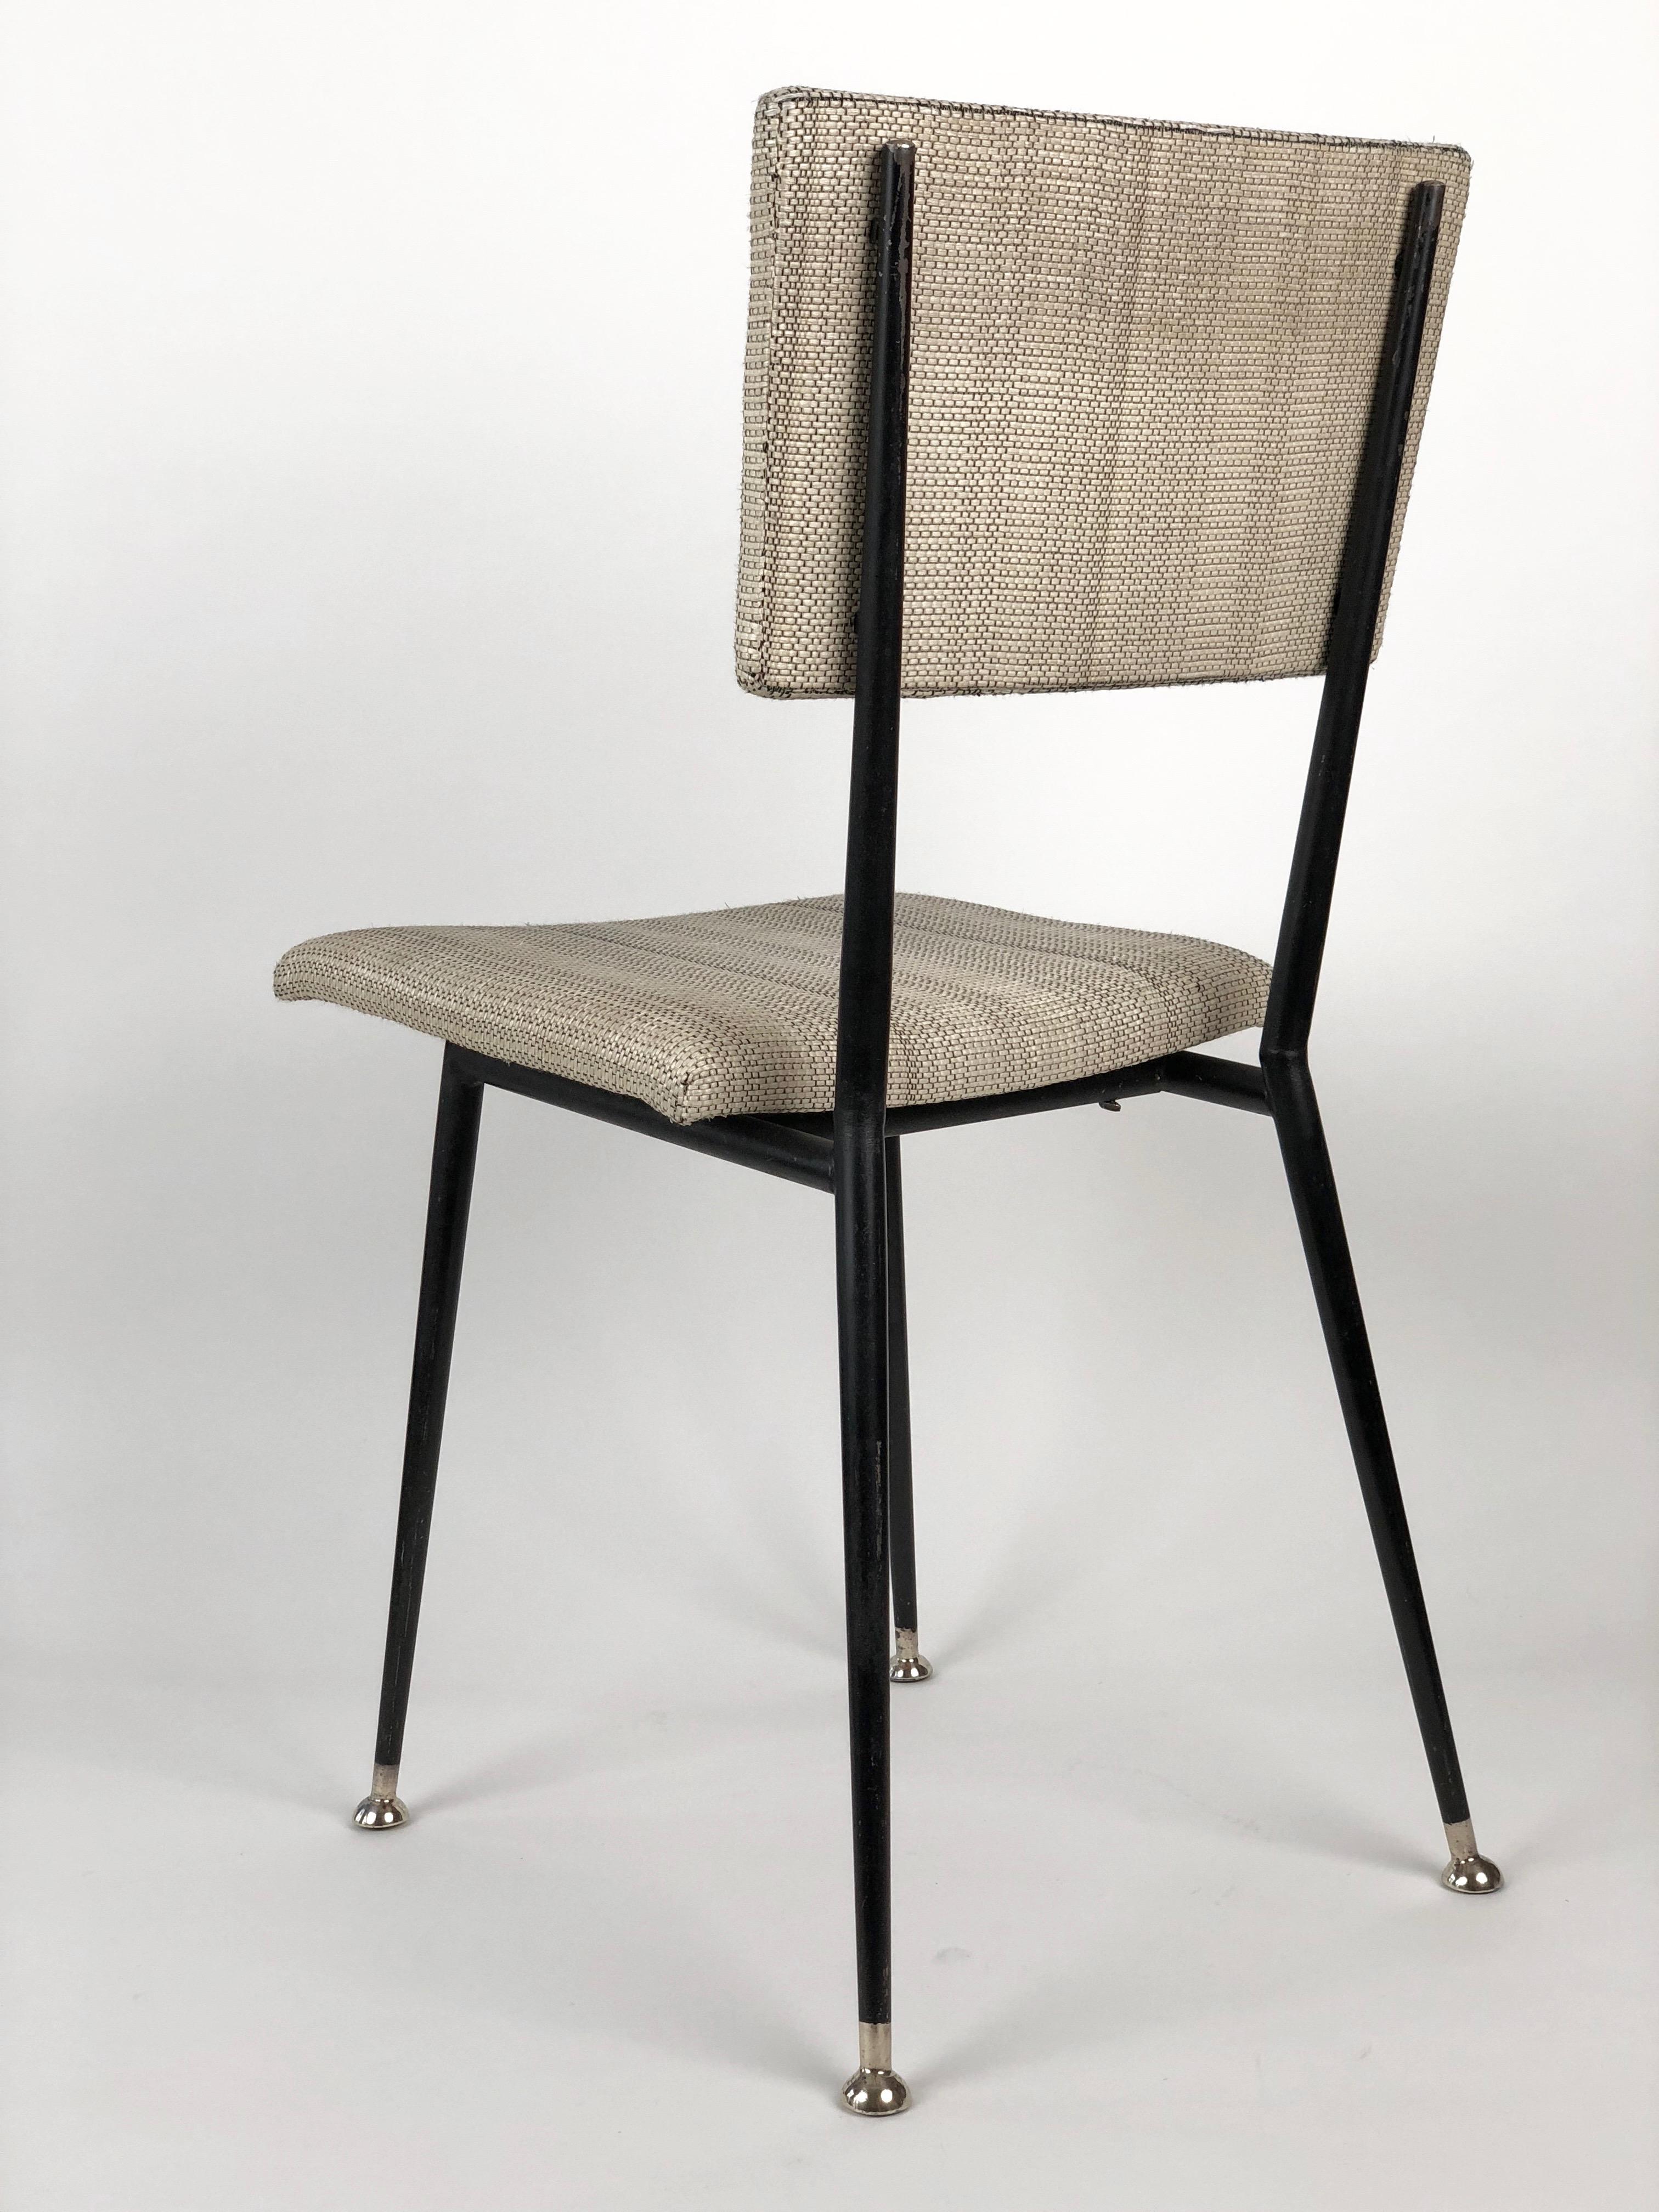 Mid-Century Modern Midcentury Chair from Sonnet, Made in Austria For Sale